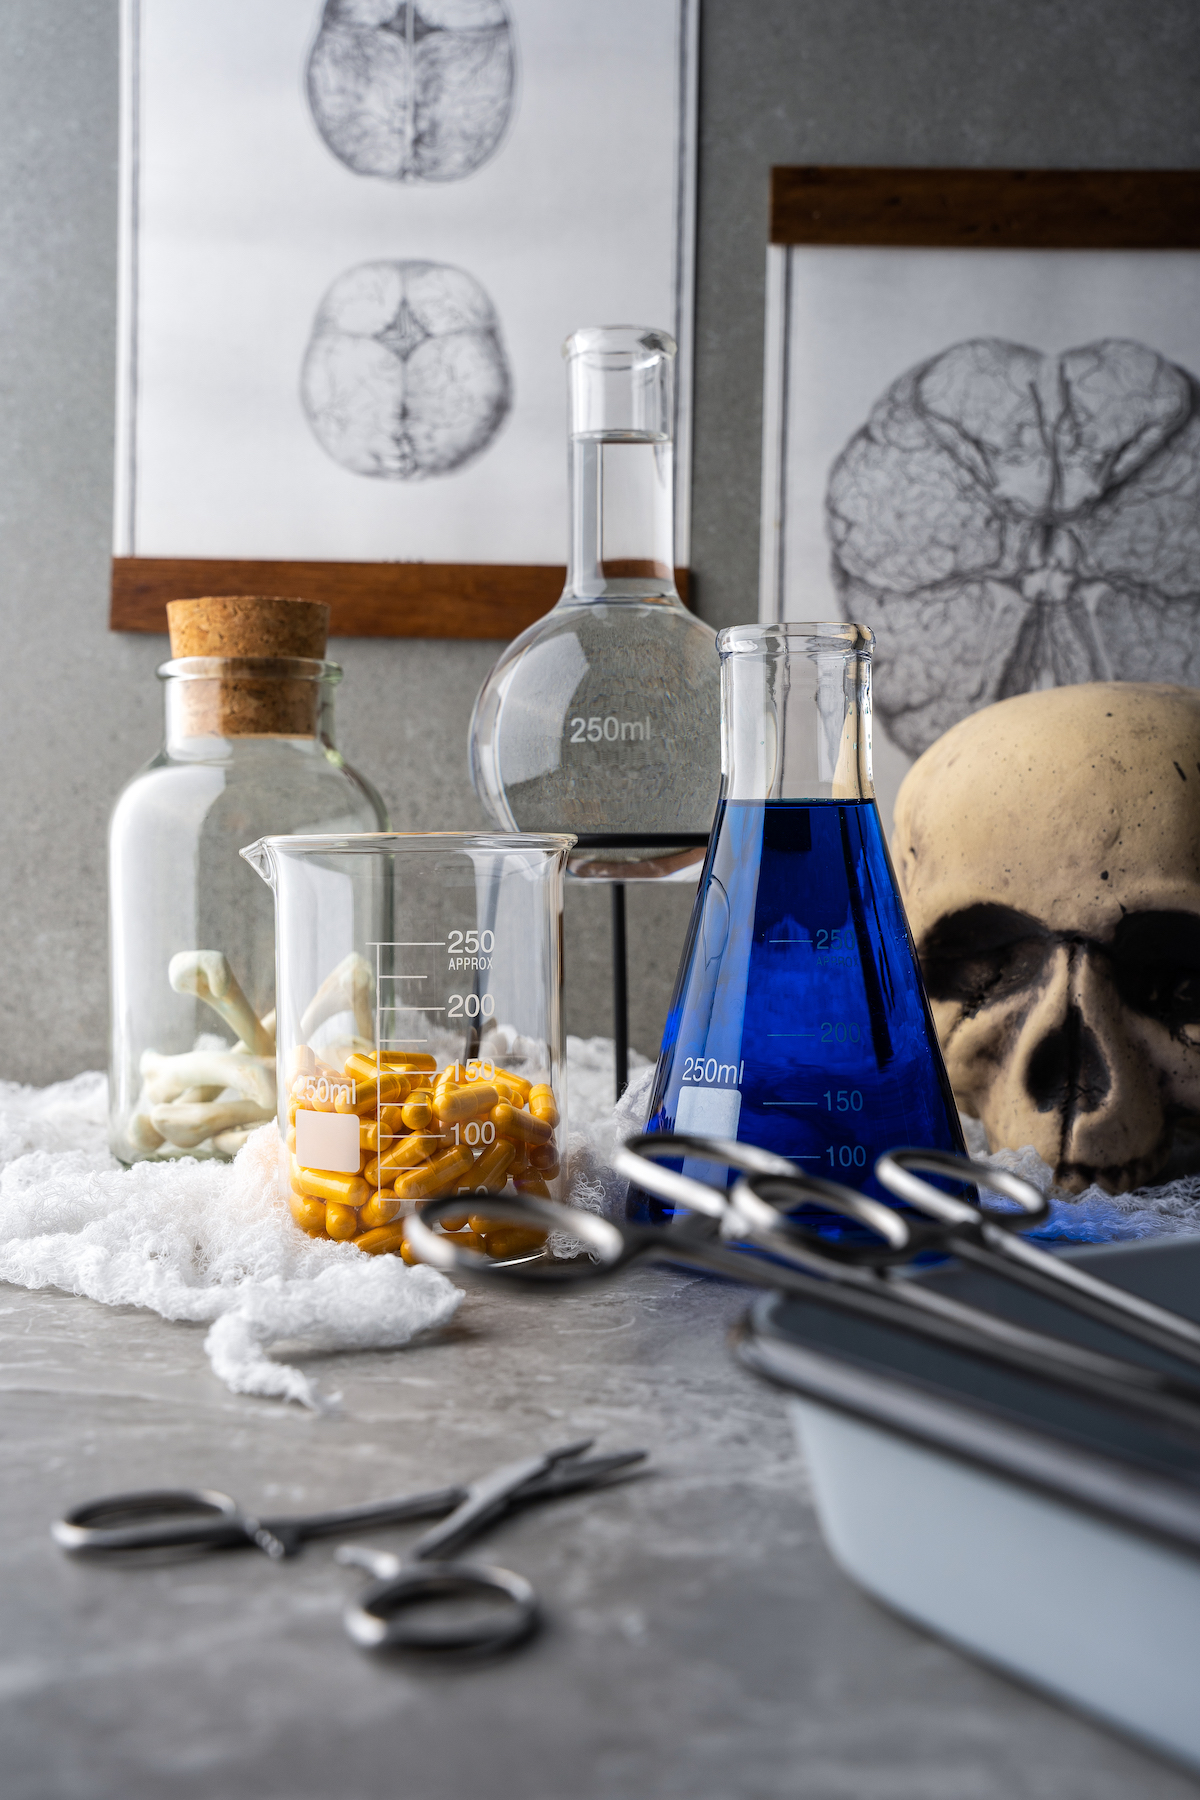 a mad scientist themed tablescape with various measuring glasses, scirrors, a glass pitcher with pills, and a blue potion